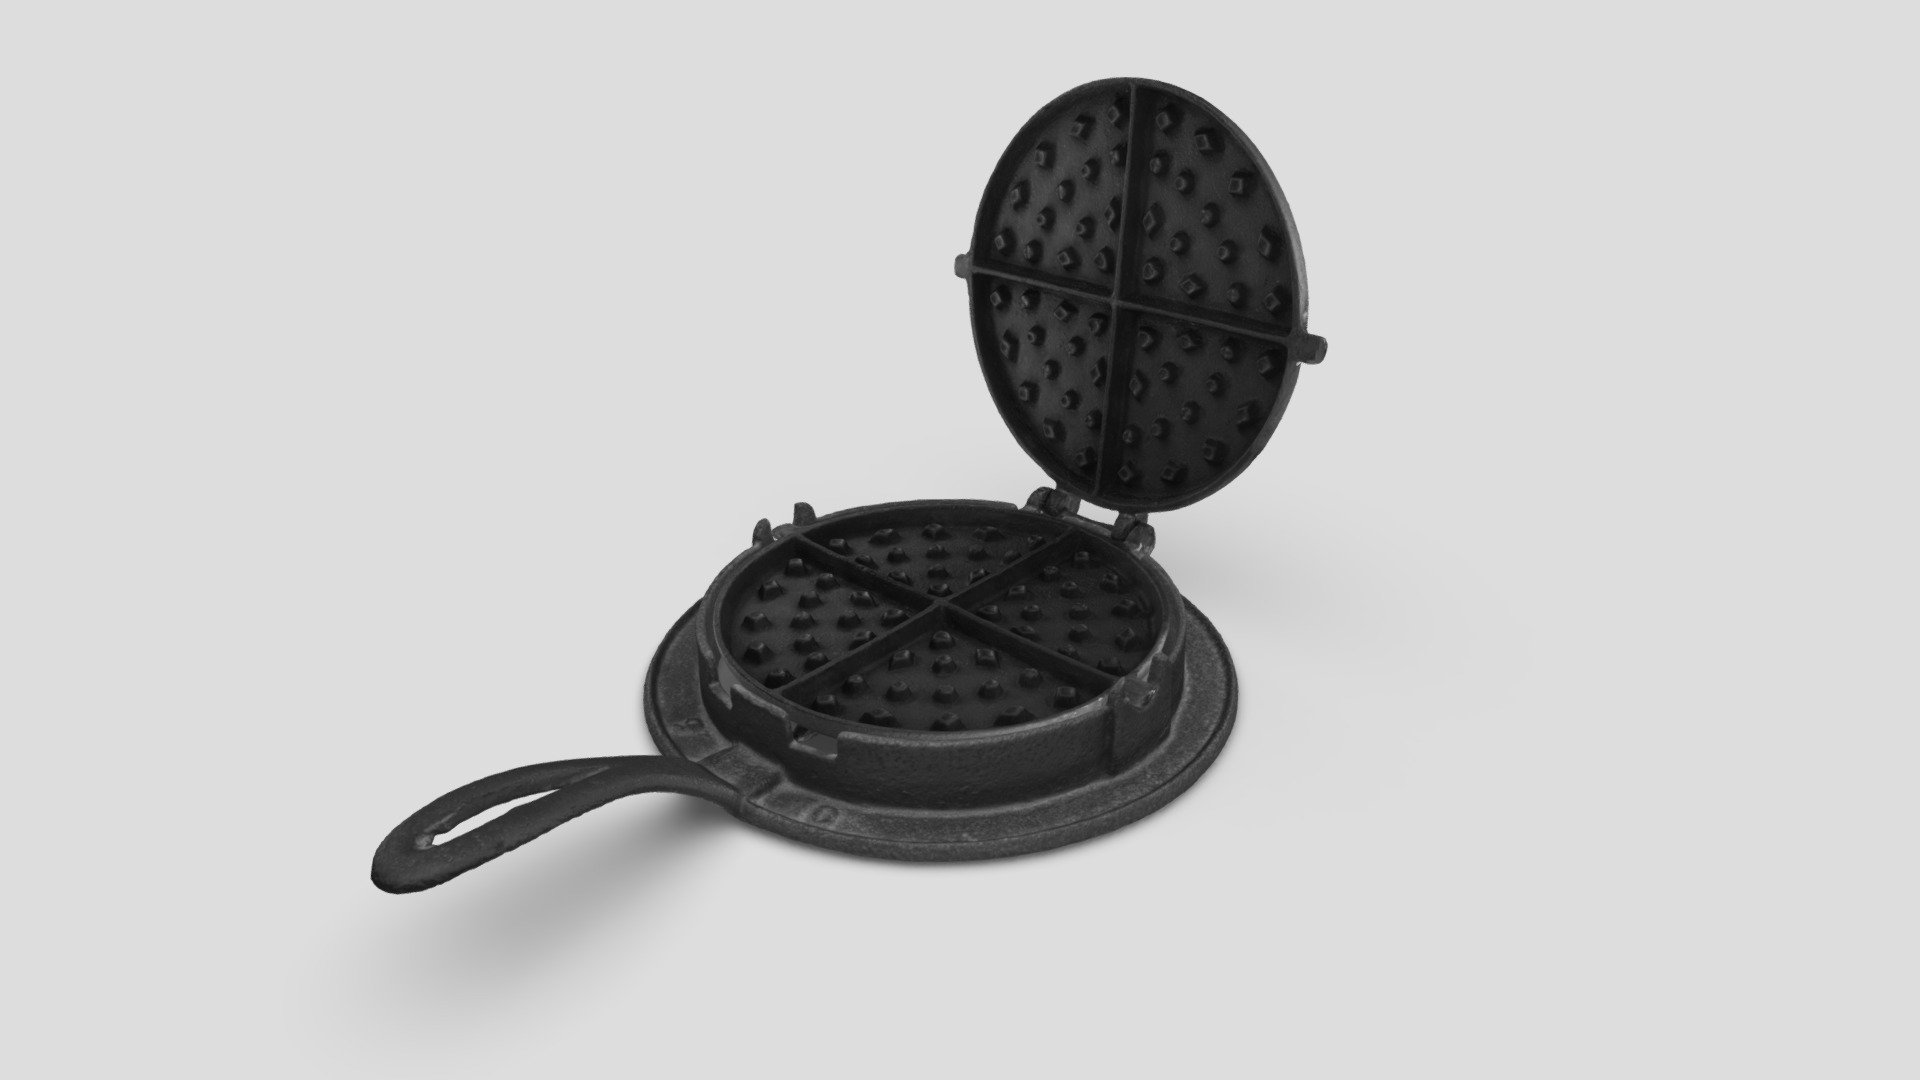 This cast iron waffle maker was made from a pattern used by multiple foundries in the 1800s and has no maker's marks on it, making it impossible to know exactly who made it. It is believed, however, given where the artifact is from, that this particular waffle iron was manufactured by the Terstegge, Gohman &amp; Co. foundry in New Albany, Indiana. This foundry also produced Anchor Stoves &amp; Ranges. Again, there is absolutely no way to know for sure who made it — it's only an educated guess. This waffle iron produces waffles with a playing cards pattern — hearts, diamonds, etc. This was an extremely popular waffle iron pattern at the time.

This artifact is housed at New Albany's Culbertson Mansion State Historic Site and was digitized using photogrammetry. The base and paddles were digitized seperately and combined in post-processing 3d model